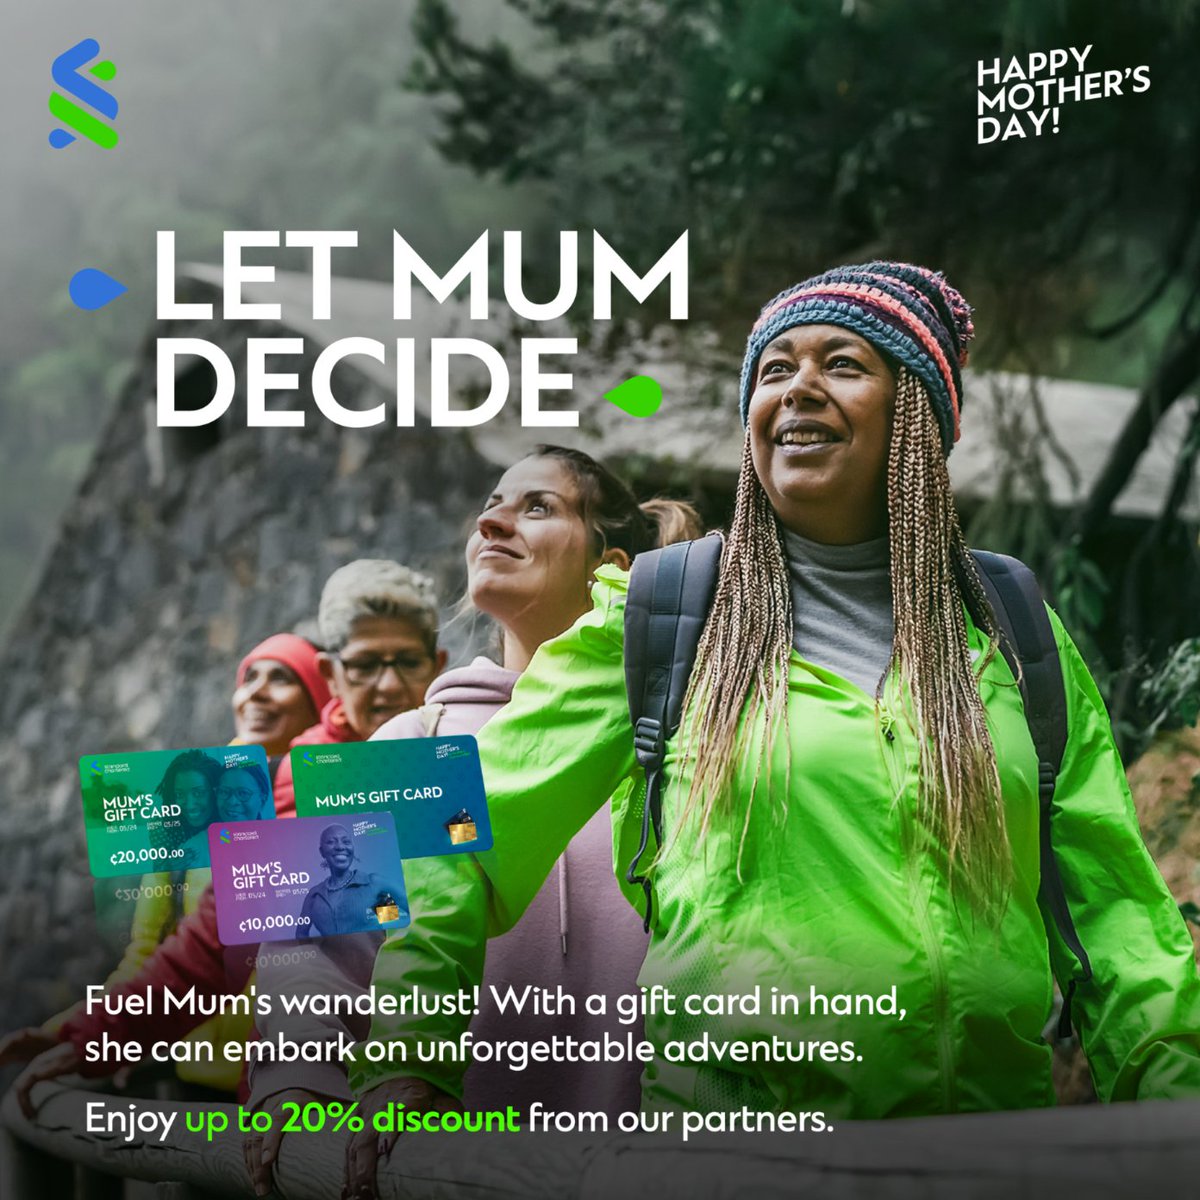 Give Mom the gift of a lifetime – freedom to choose the perfect gift for herself this Mother’s Day. Customize a gift card for your mom. Load it with cash from your account. Let her spend as she wants with discounts from our alliance partners too. #MayForMoms #LetMomDecide